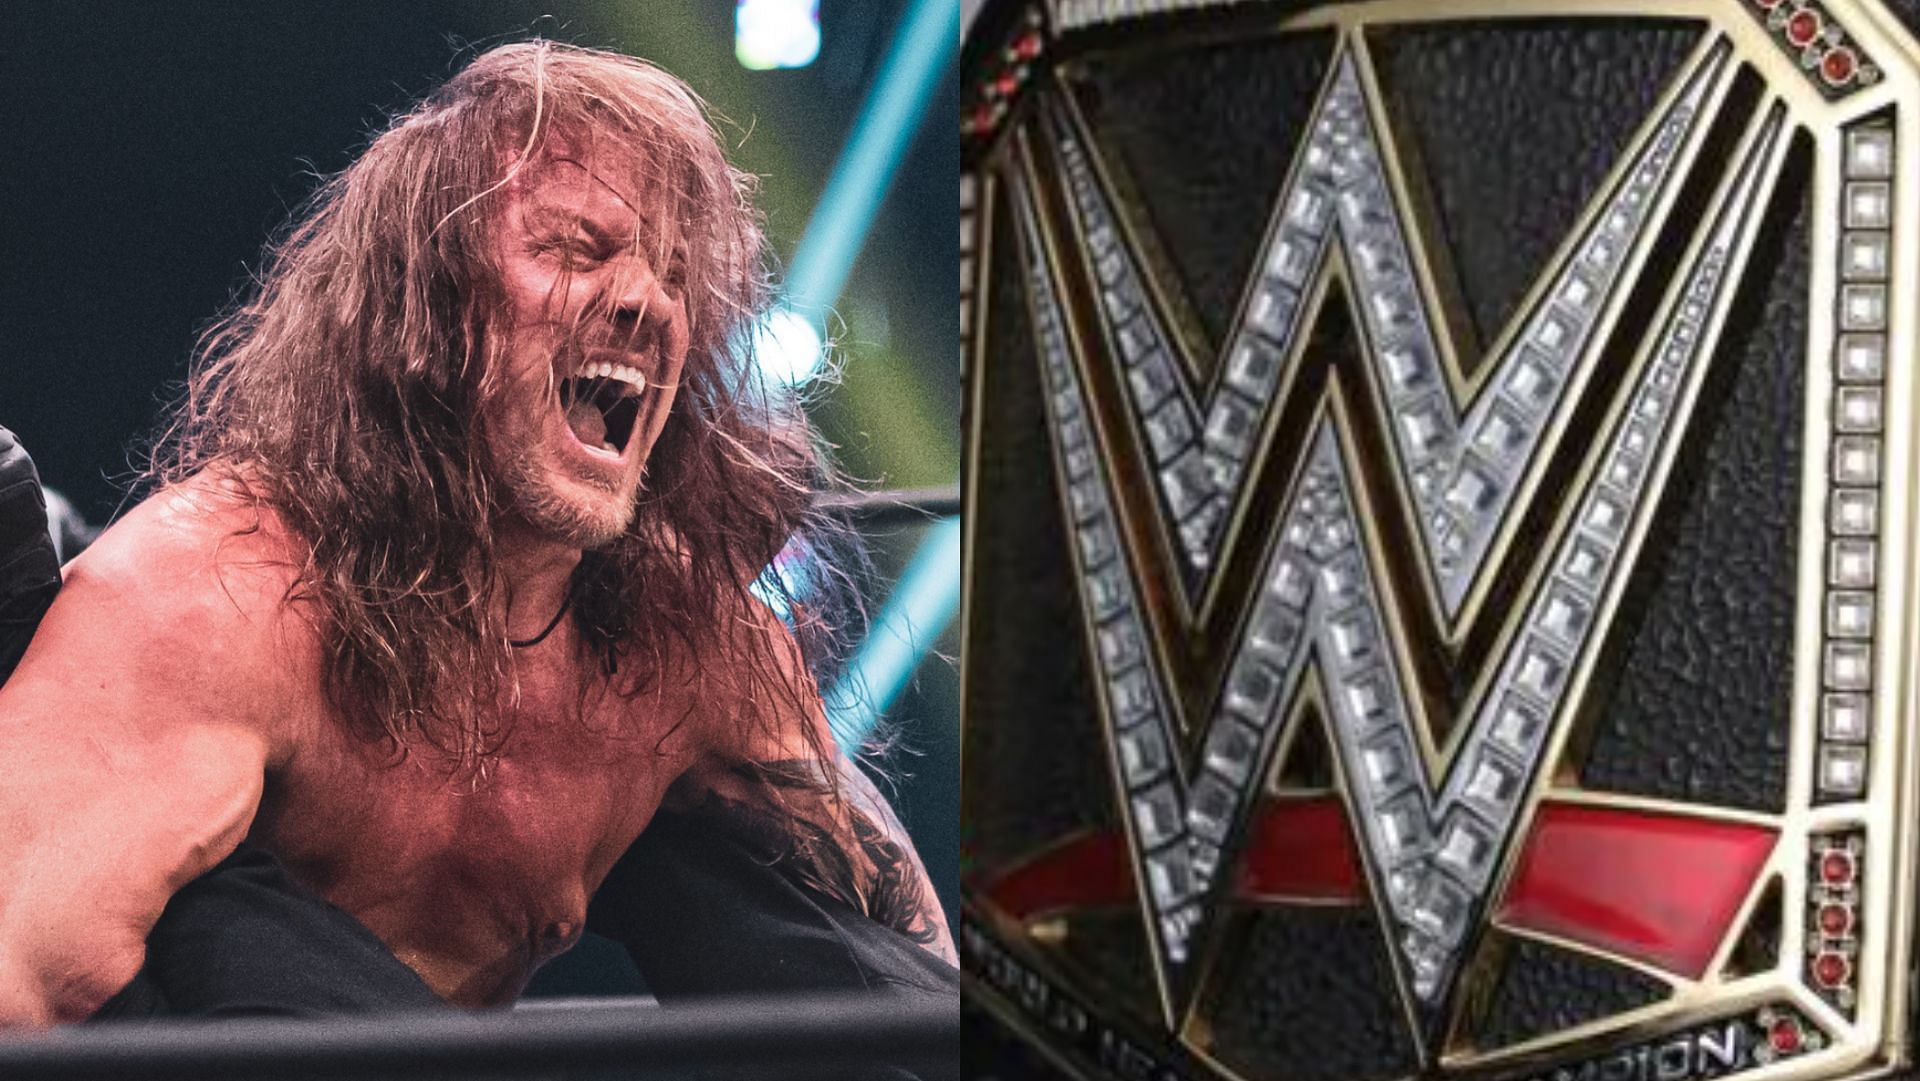 Chris Jericho could be facing a former WWE champion at All Out 2022